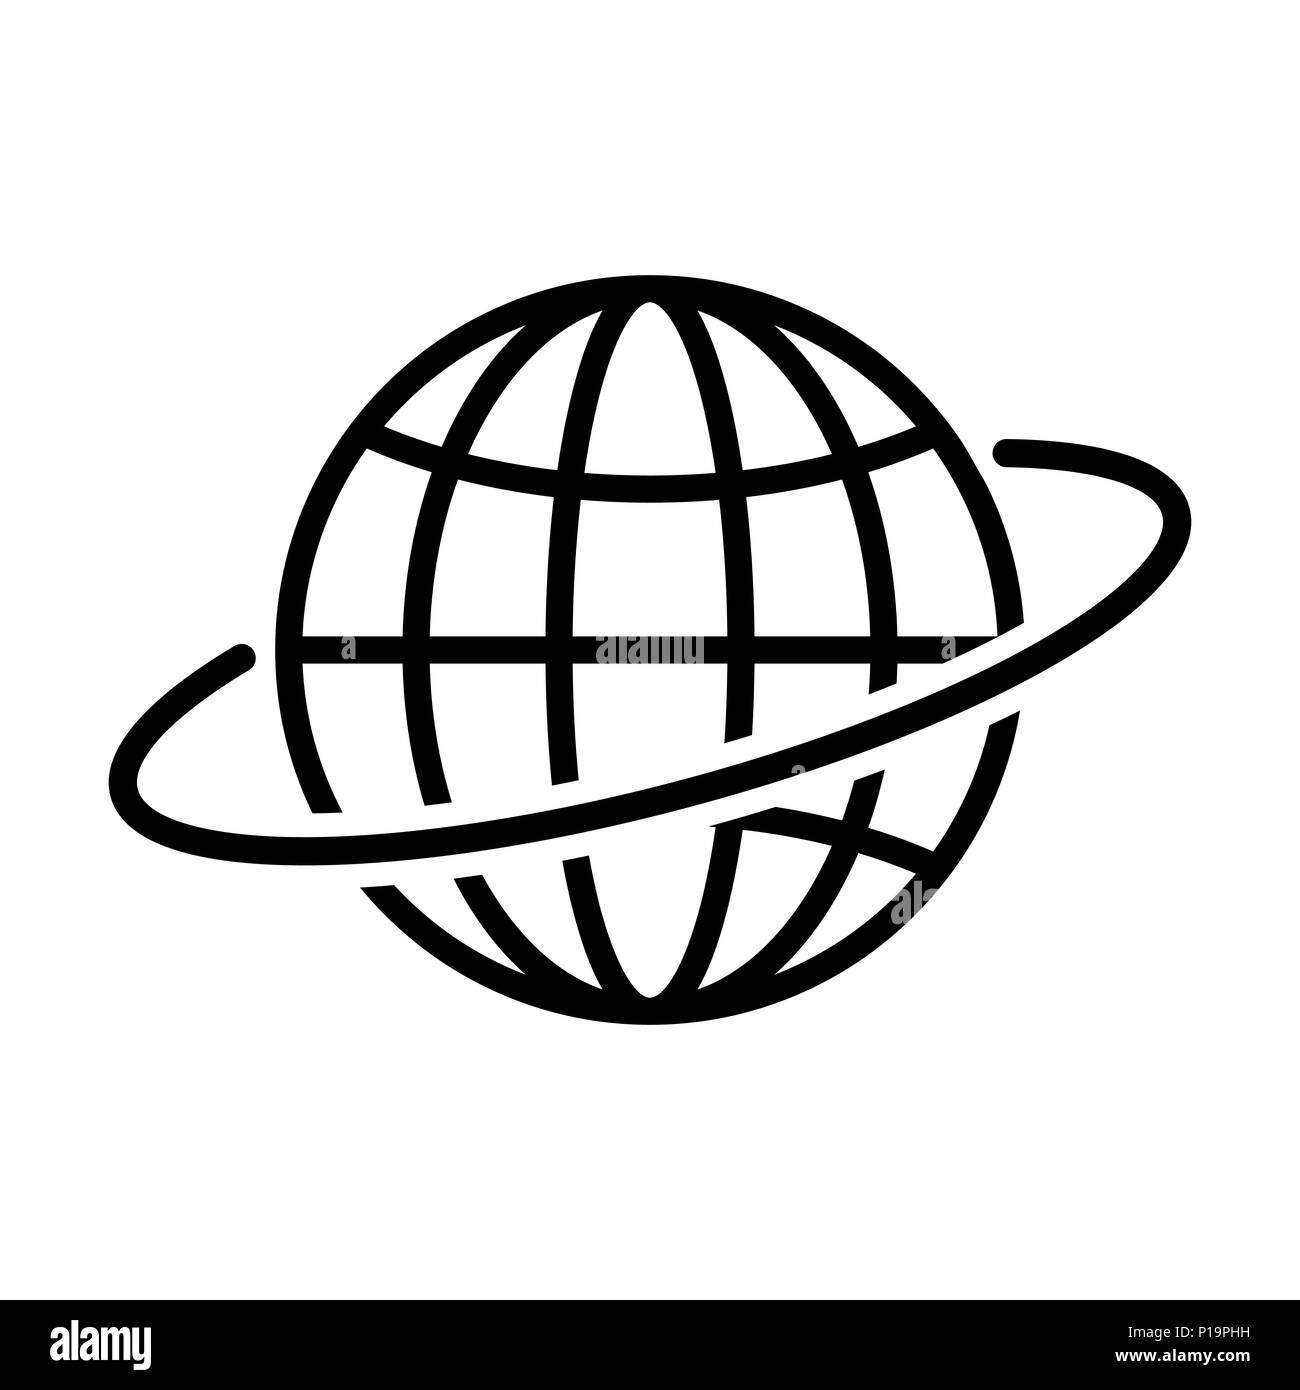 Globe outline icon in flat style. Earth symbol Stock Vector